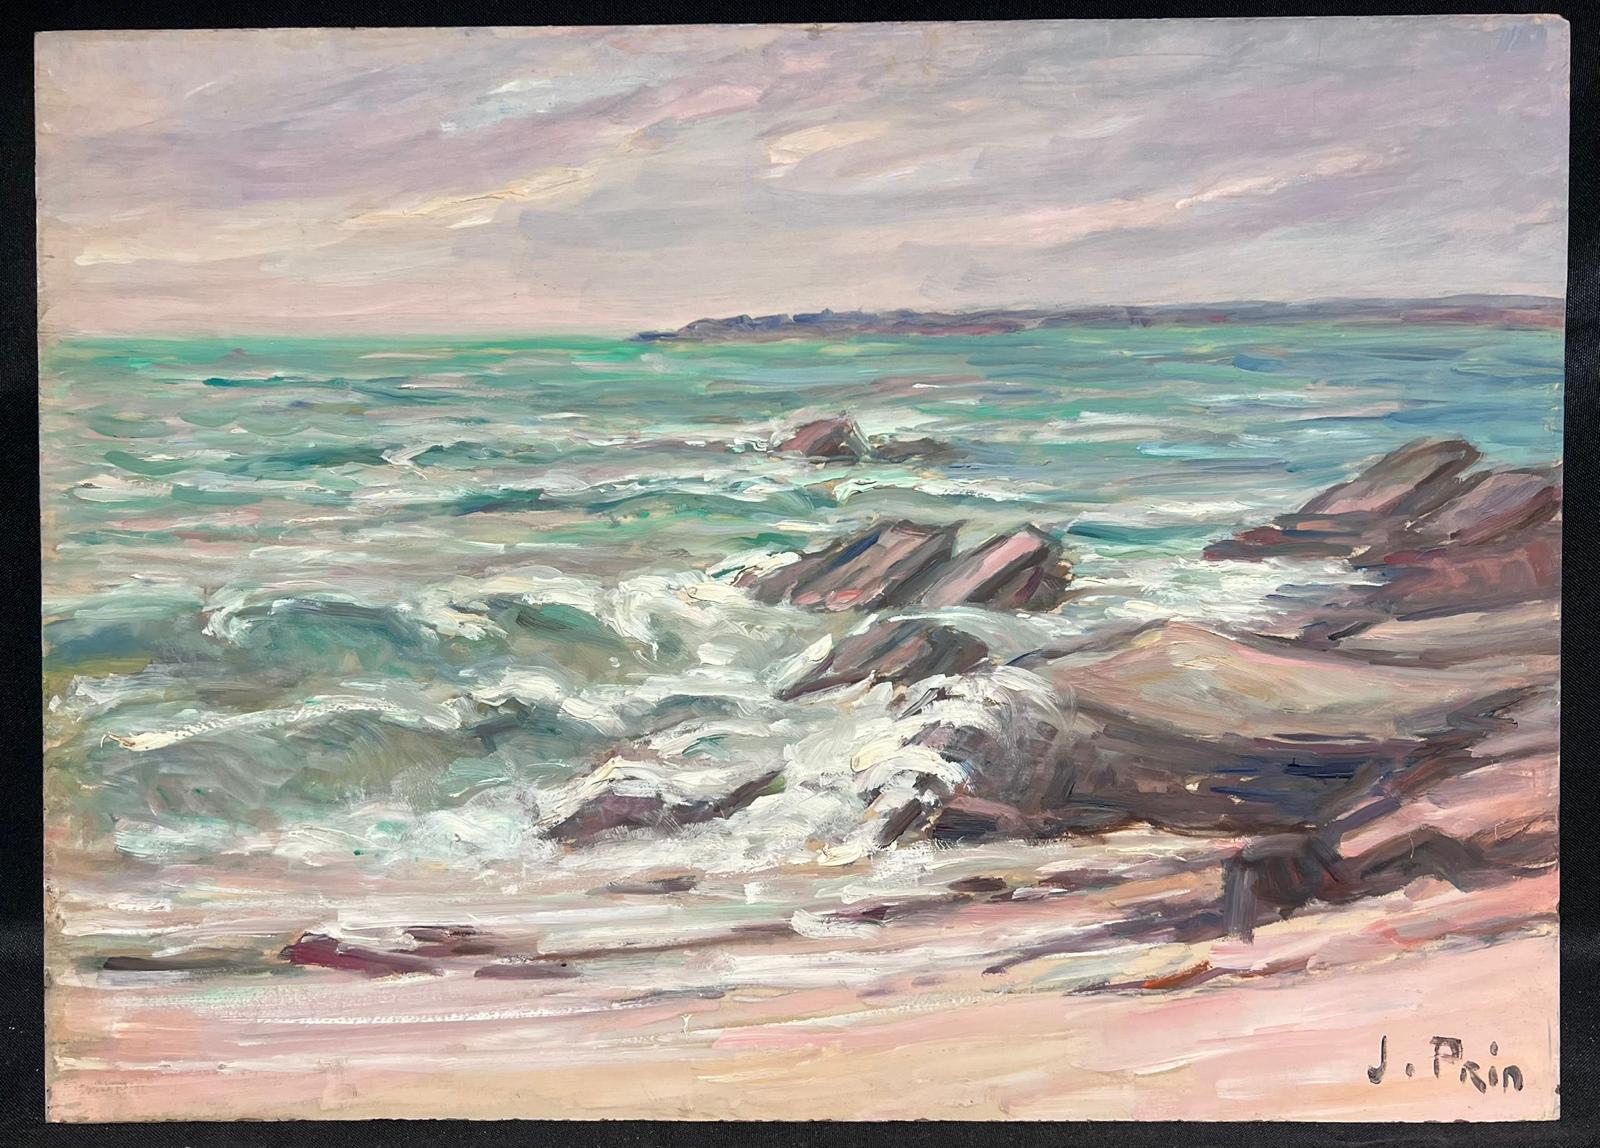 French Impressionist artist, 20th century
Crashing Waves
signed oil on board, unframed
board: 13 x 18 inches
provenance: private collection
condition: very good and sound condition